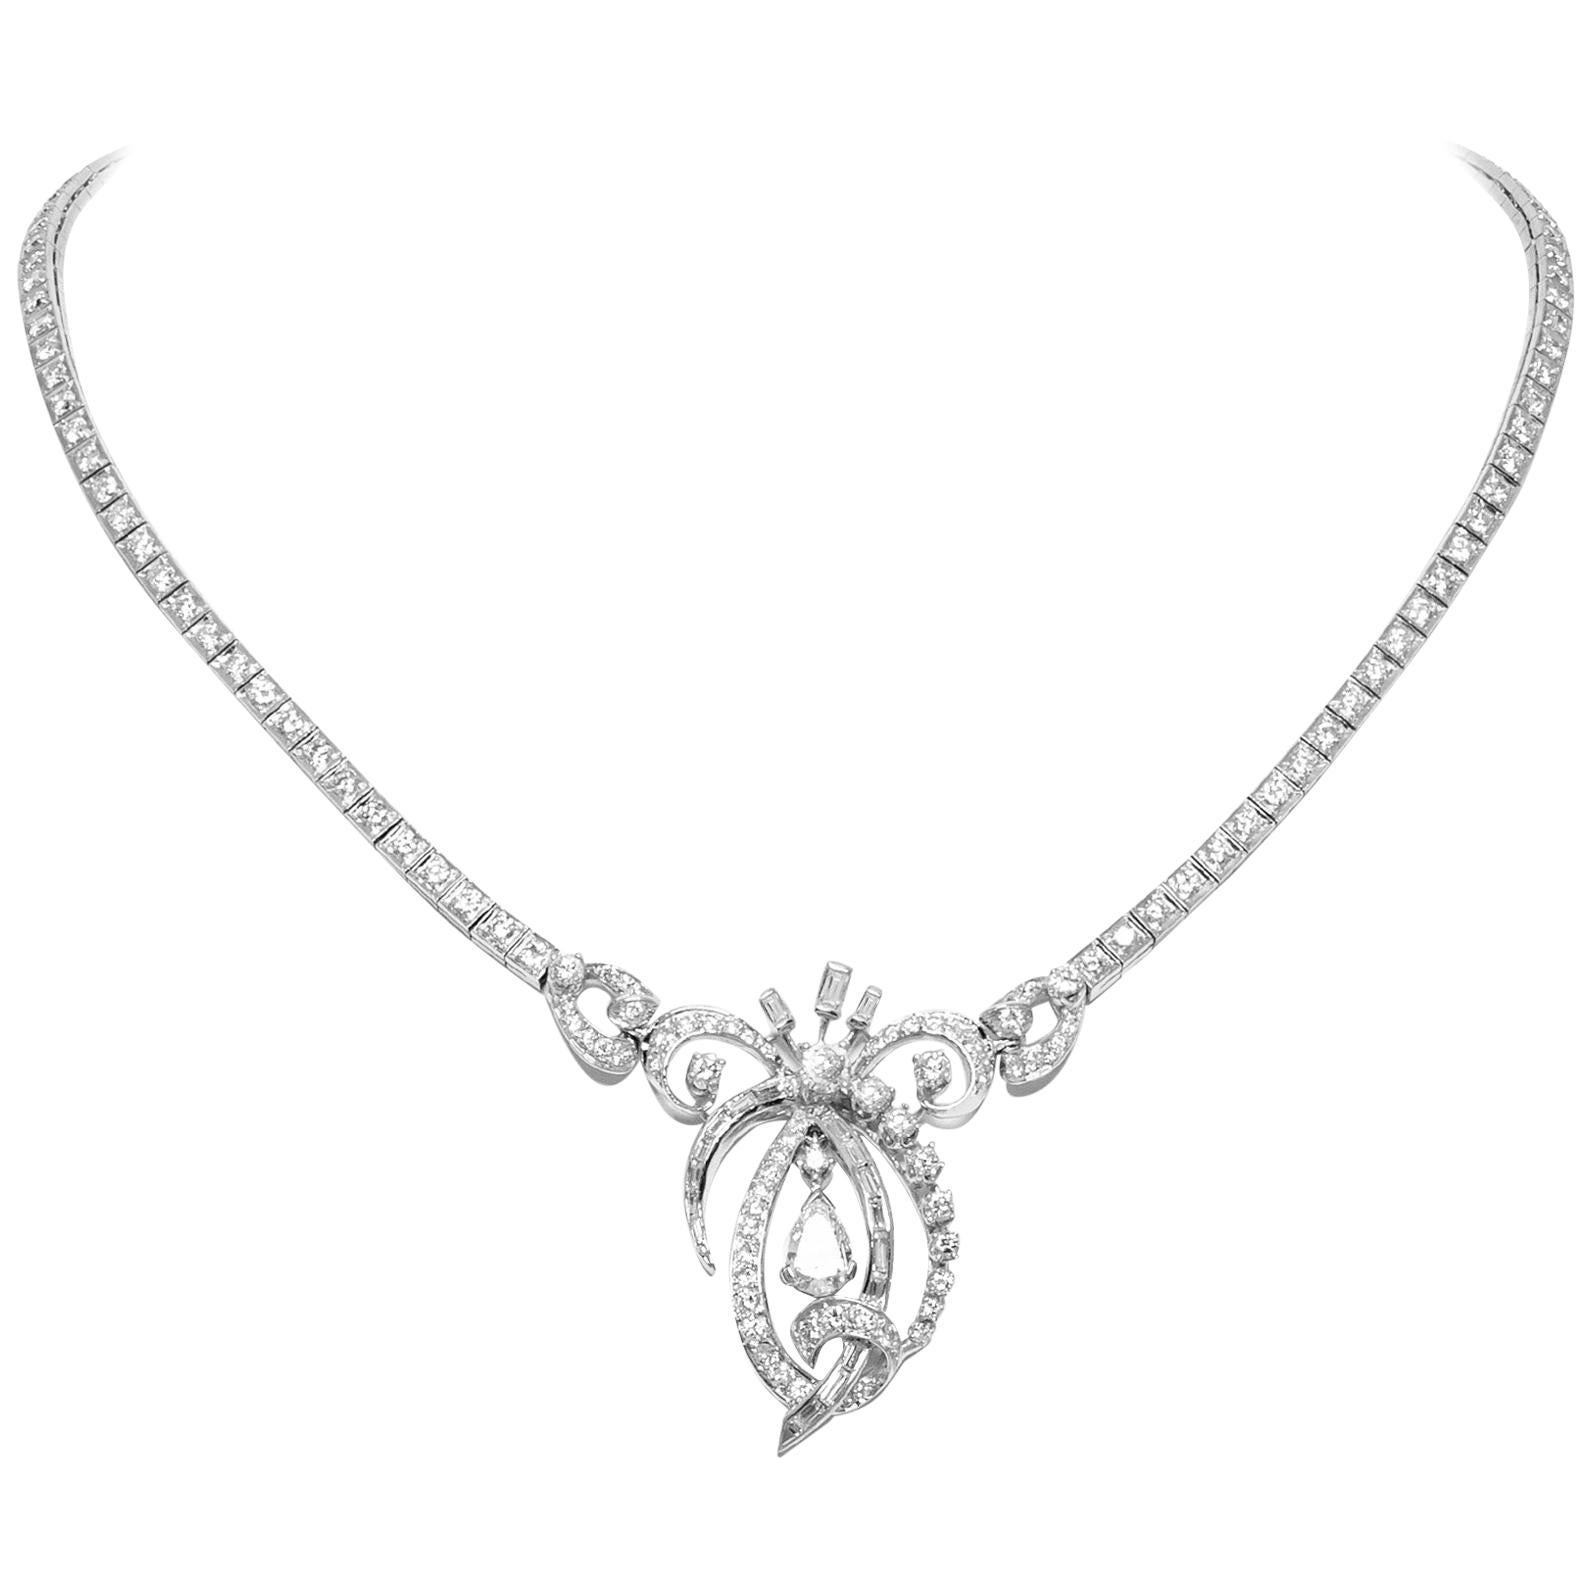 Necklace with Diamond Pendant For Sale